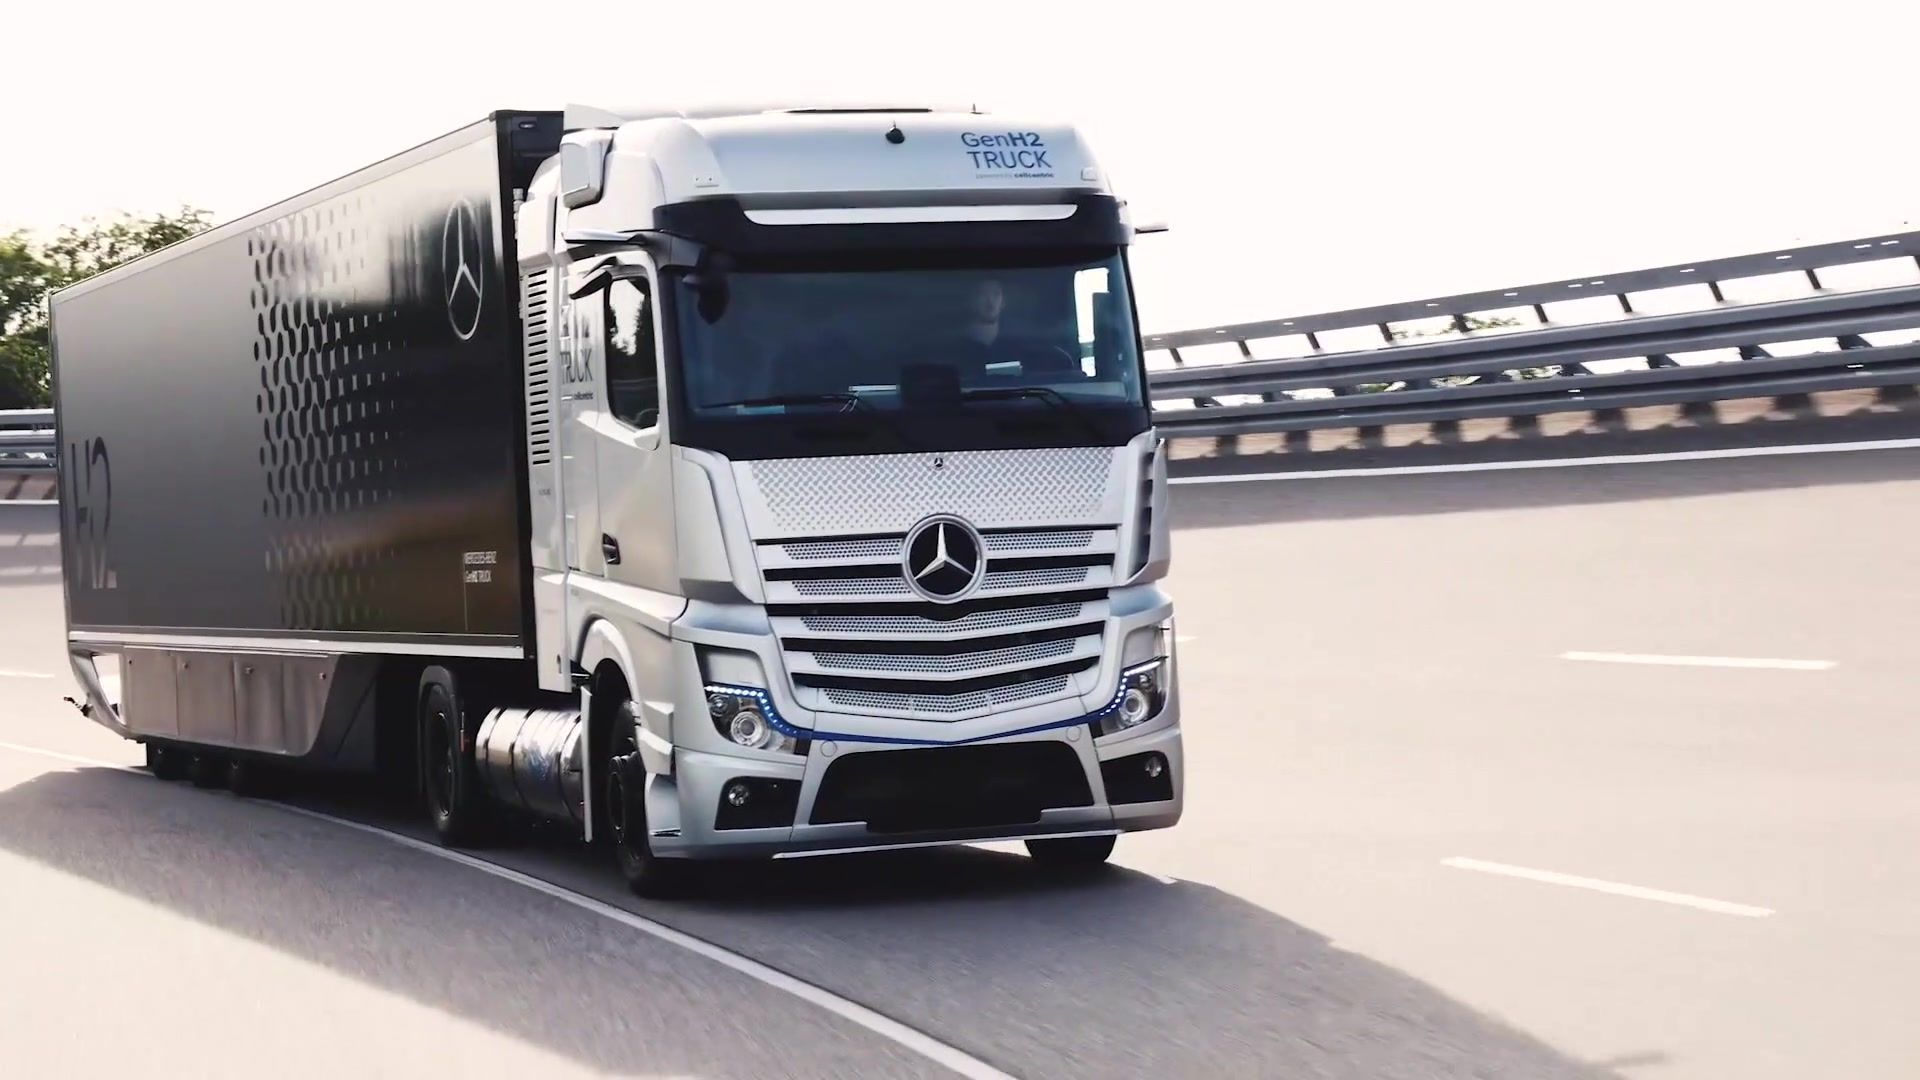 Mercedes-Benz GenH2 Truck - Key figures of the GenH2 Truck based on conventional long-haul trucks